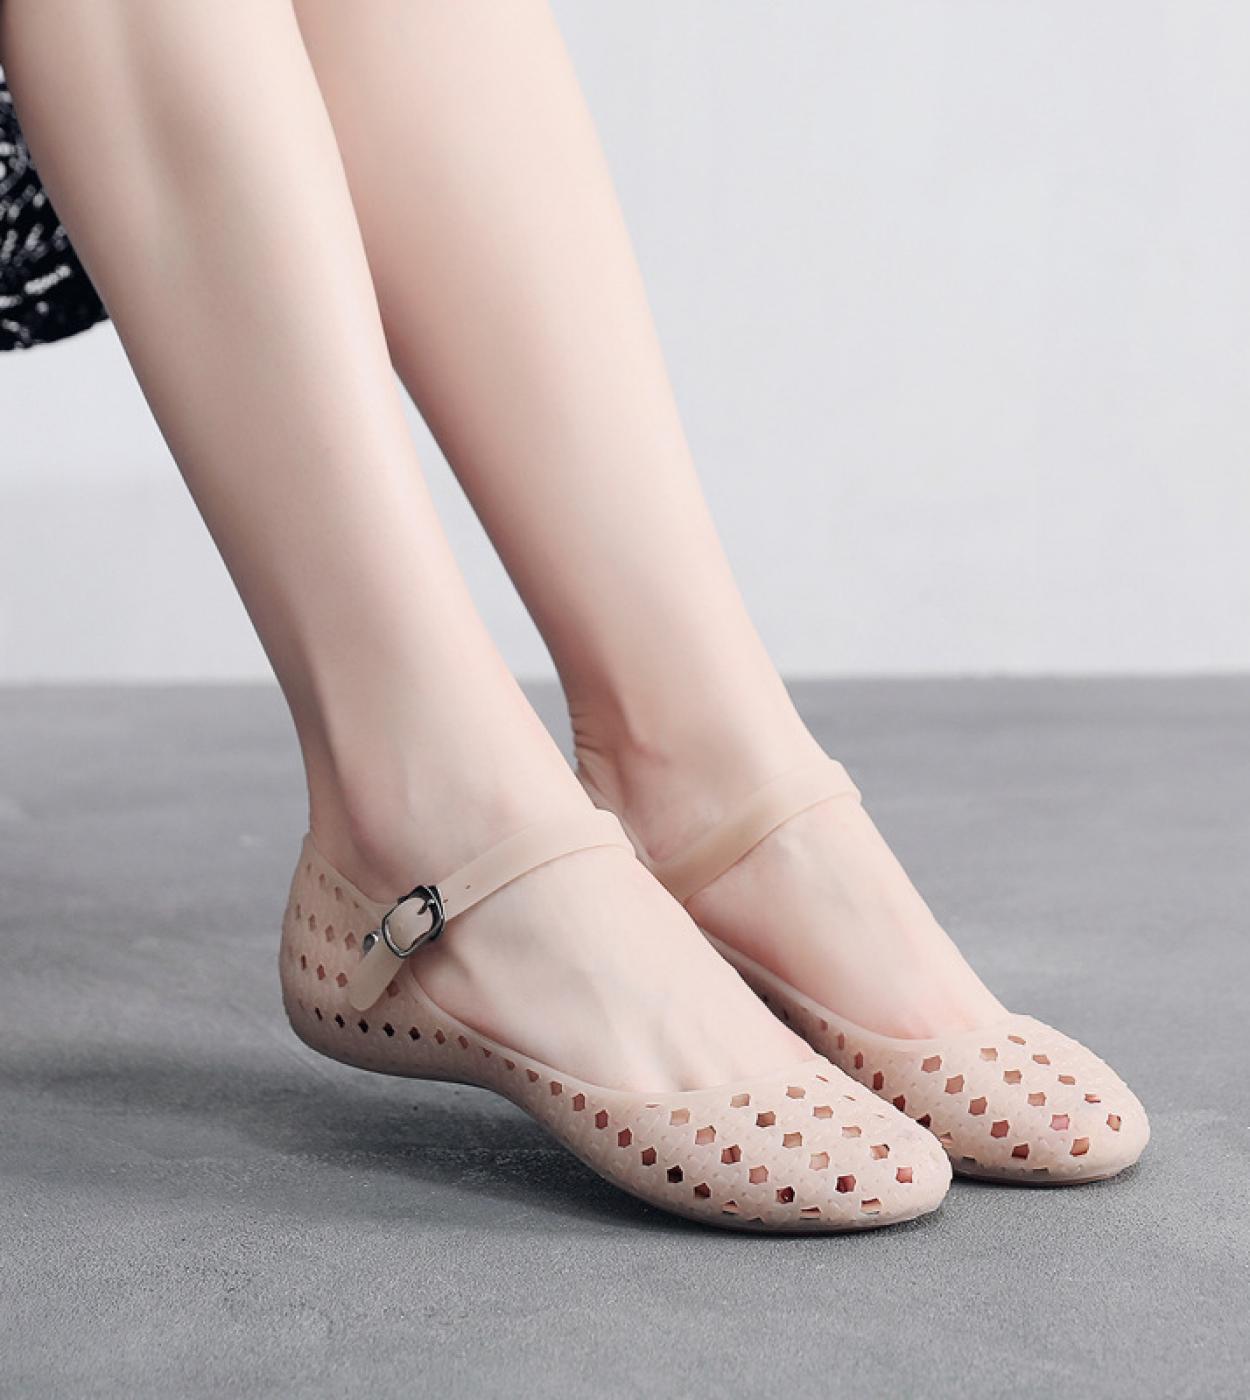 Flower Jelly Sandals Women  Flat Sandals Sweet Jelly Shoes  Summer Style Fashion  